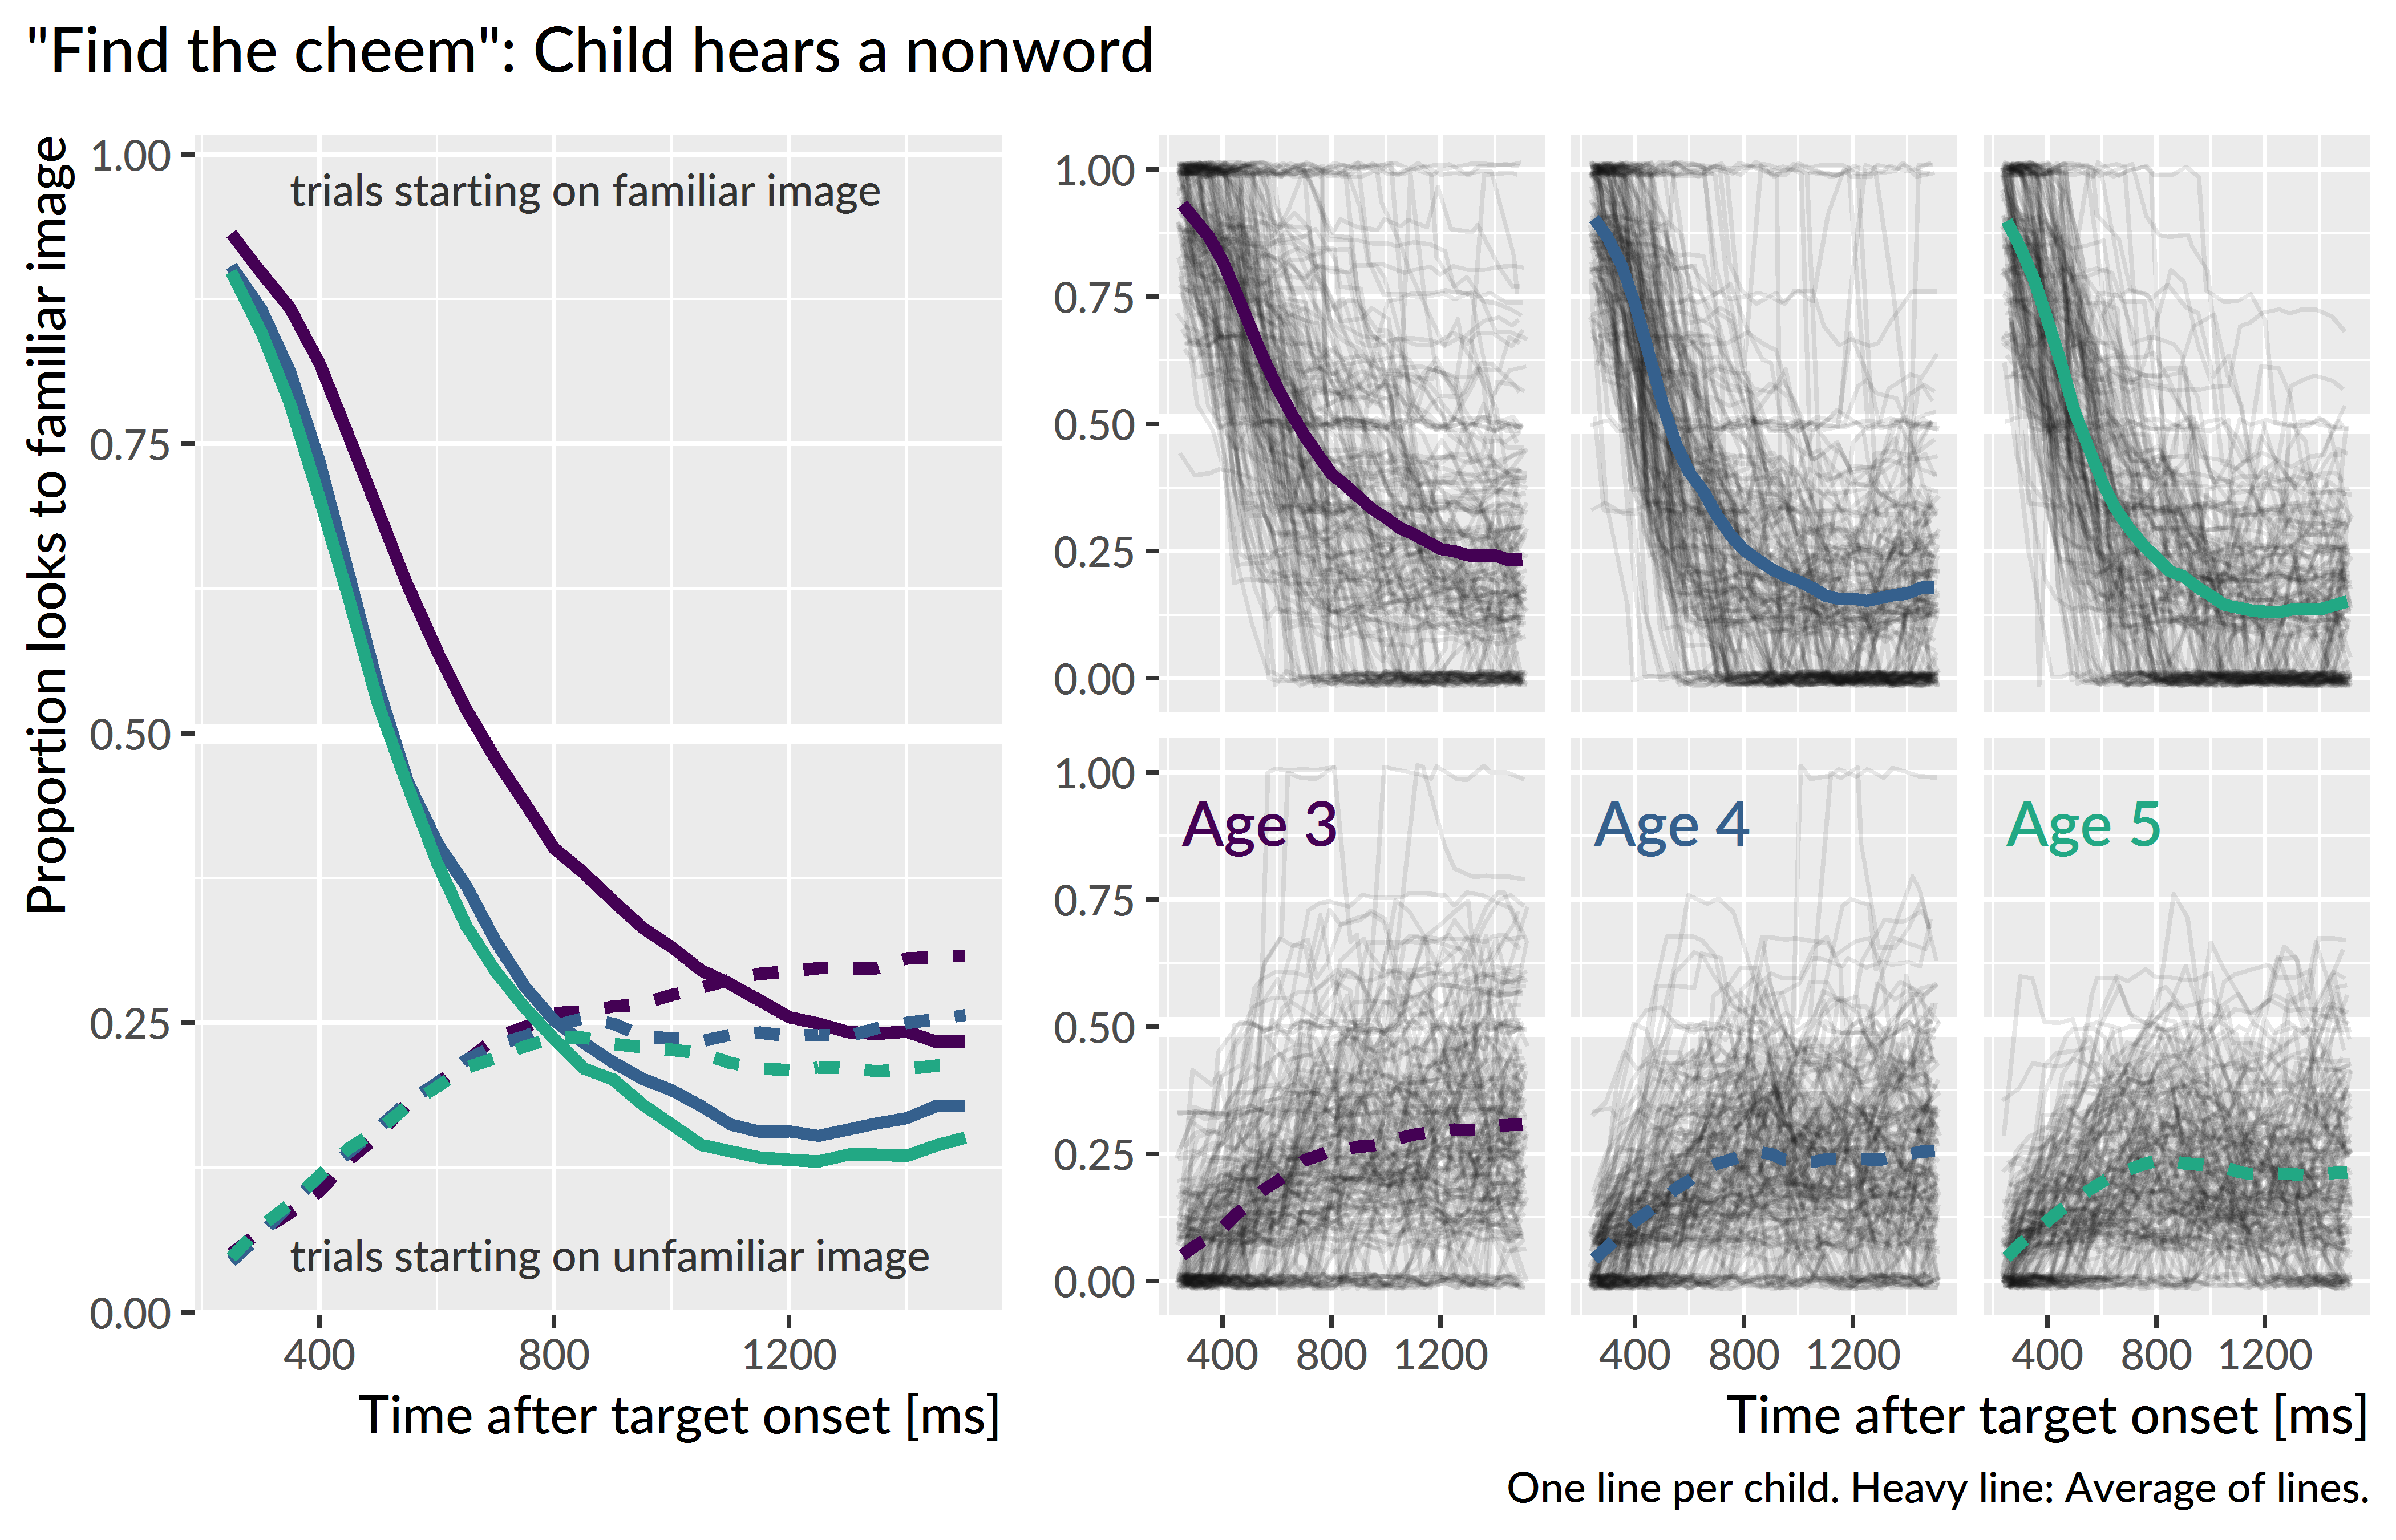 Empirical word recognition growth curves for the nonwords. Only the steep, downward growth curves from familiar-initial trials are analyzed.